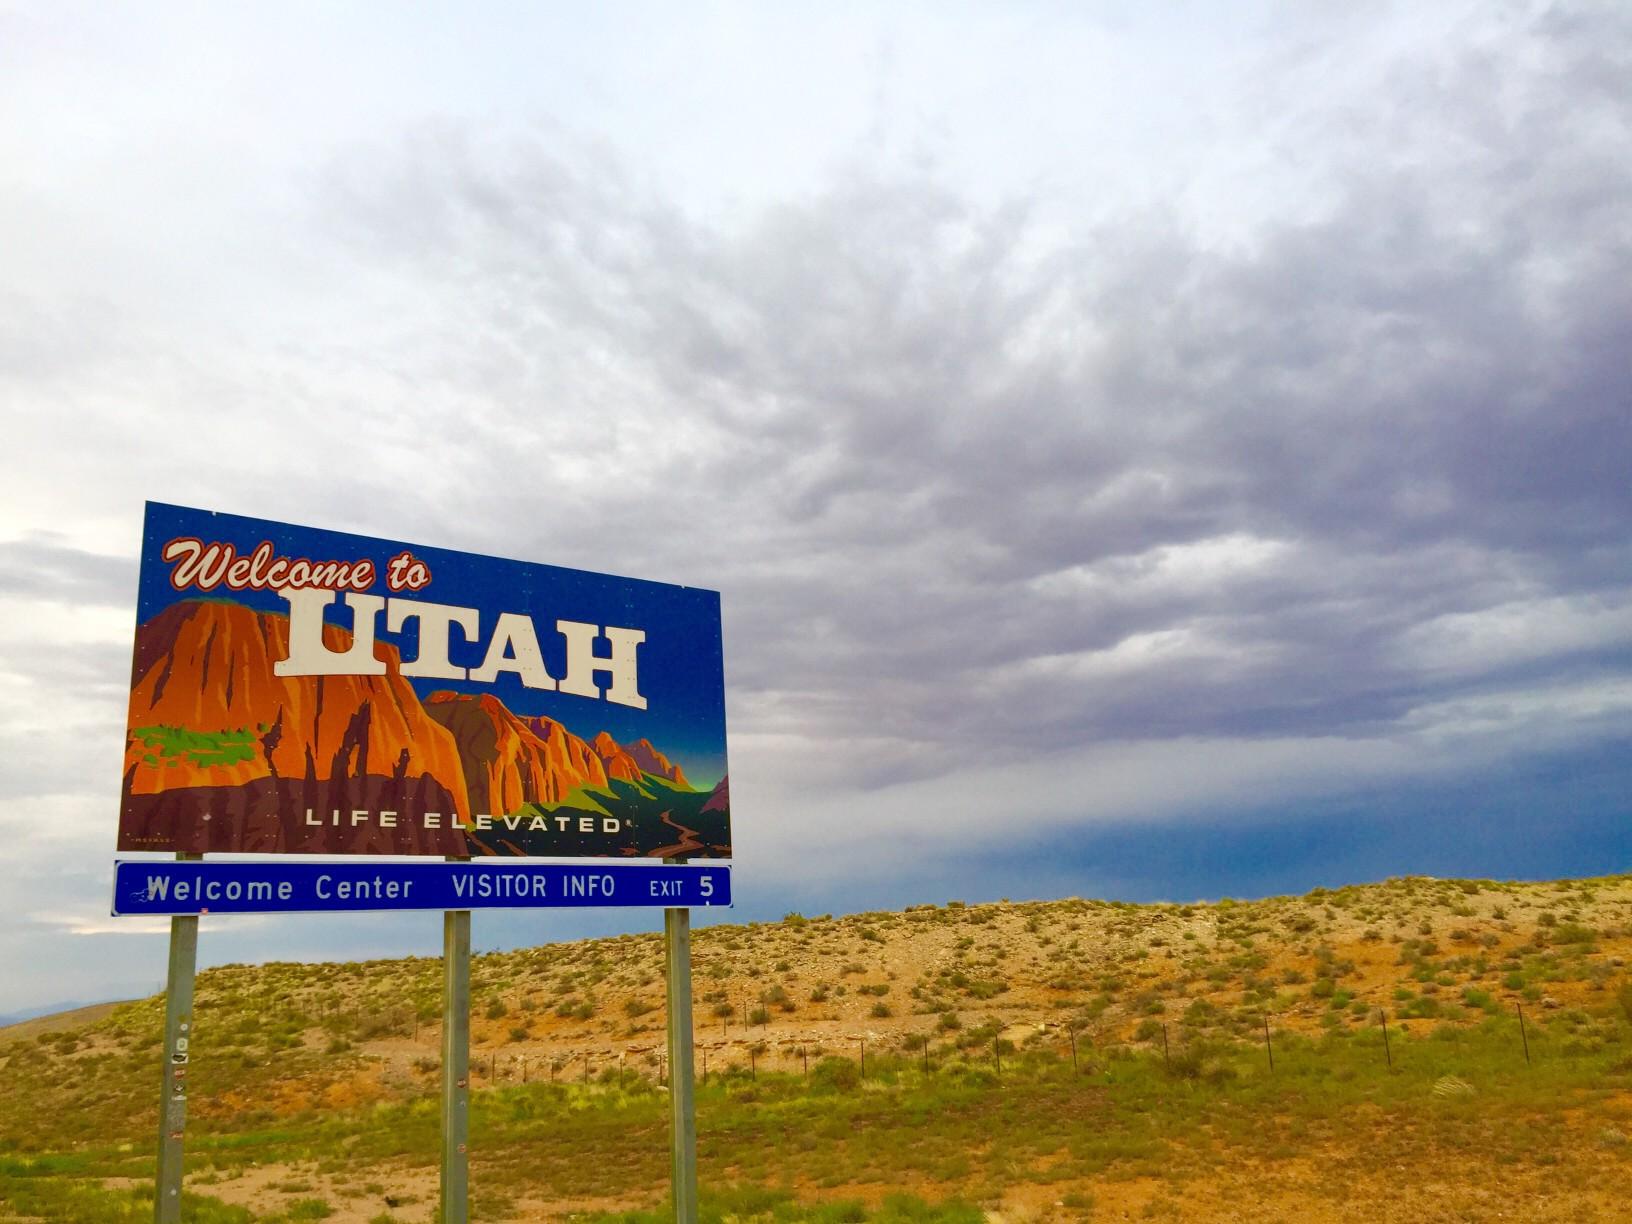 Utah is home to some of the most beautiful scenery in the U.S.